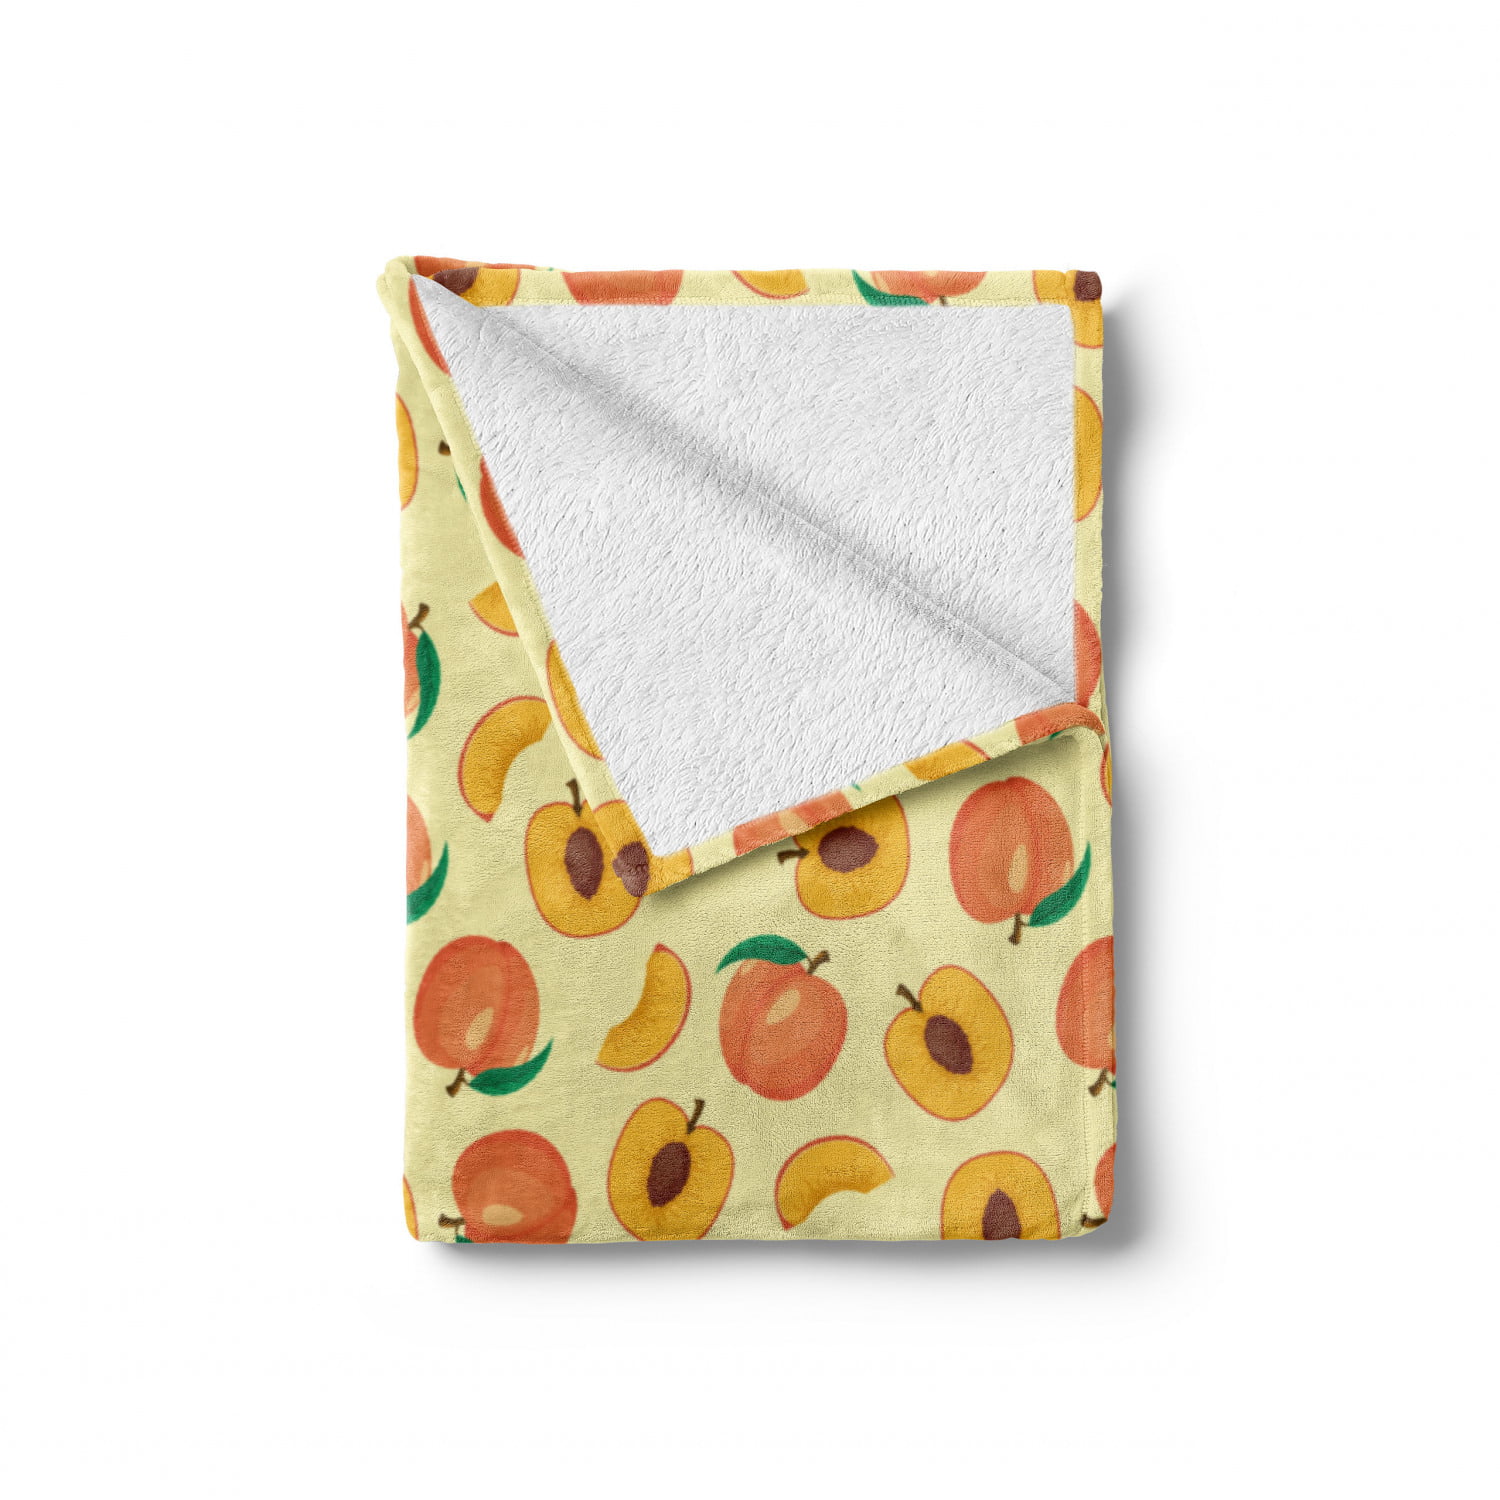 Cozy Plush for Indoor and Outdoor Use Pale Yellow Burnt Sienna 60 x 80 Ambesonne Peach Soft Flannel Fleece Throw Blanket Rhythmic Fresh Raw Sliced Fruits Warm Pastel Tones Illustration Print